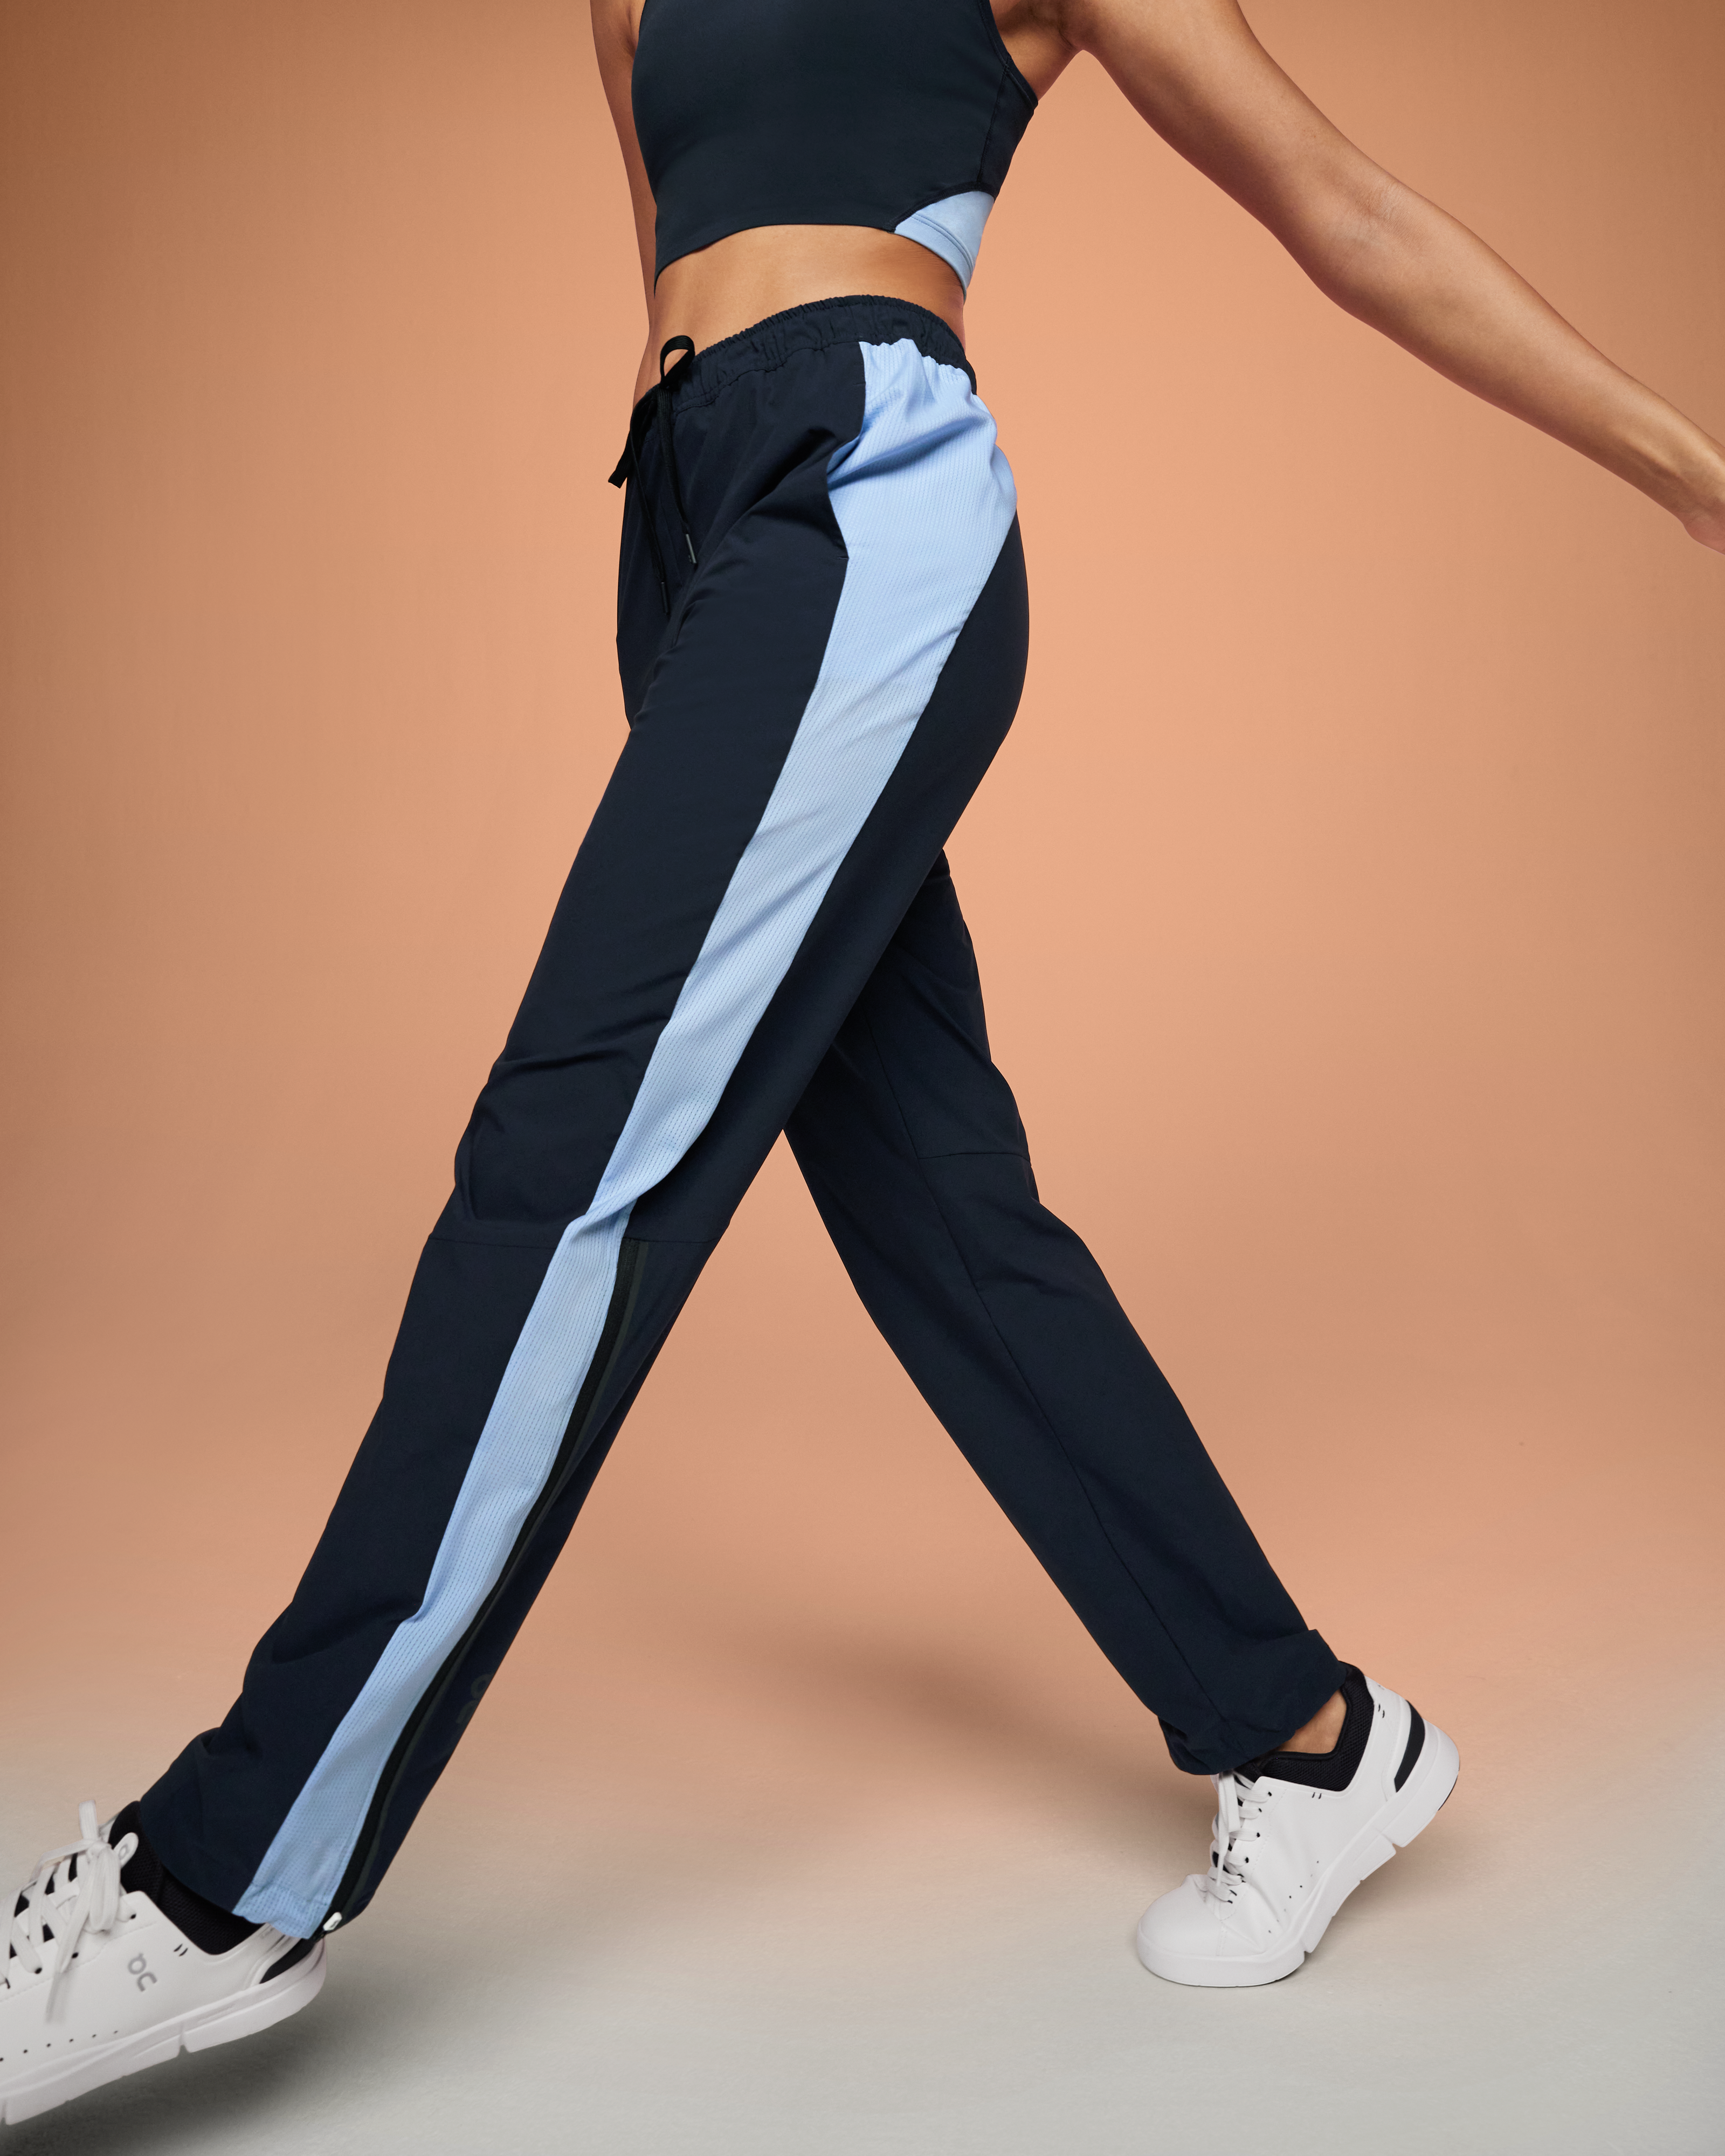 AmericanElm Navy Blue Women's Trackpants for Sports Gym